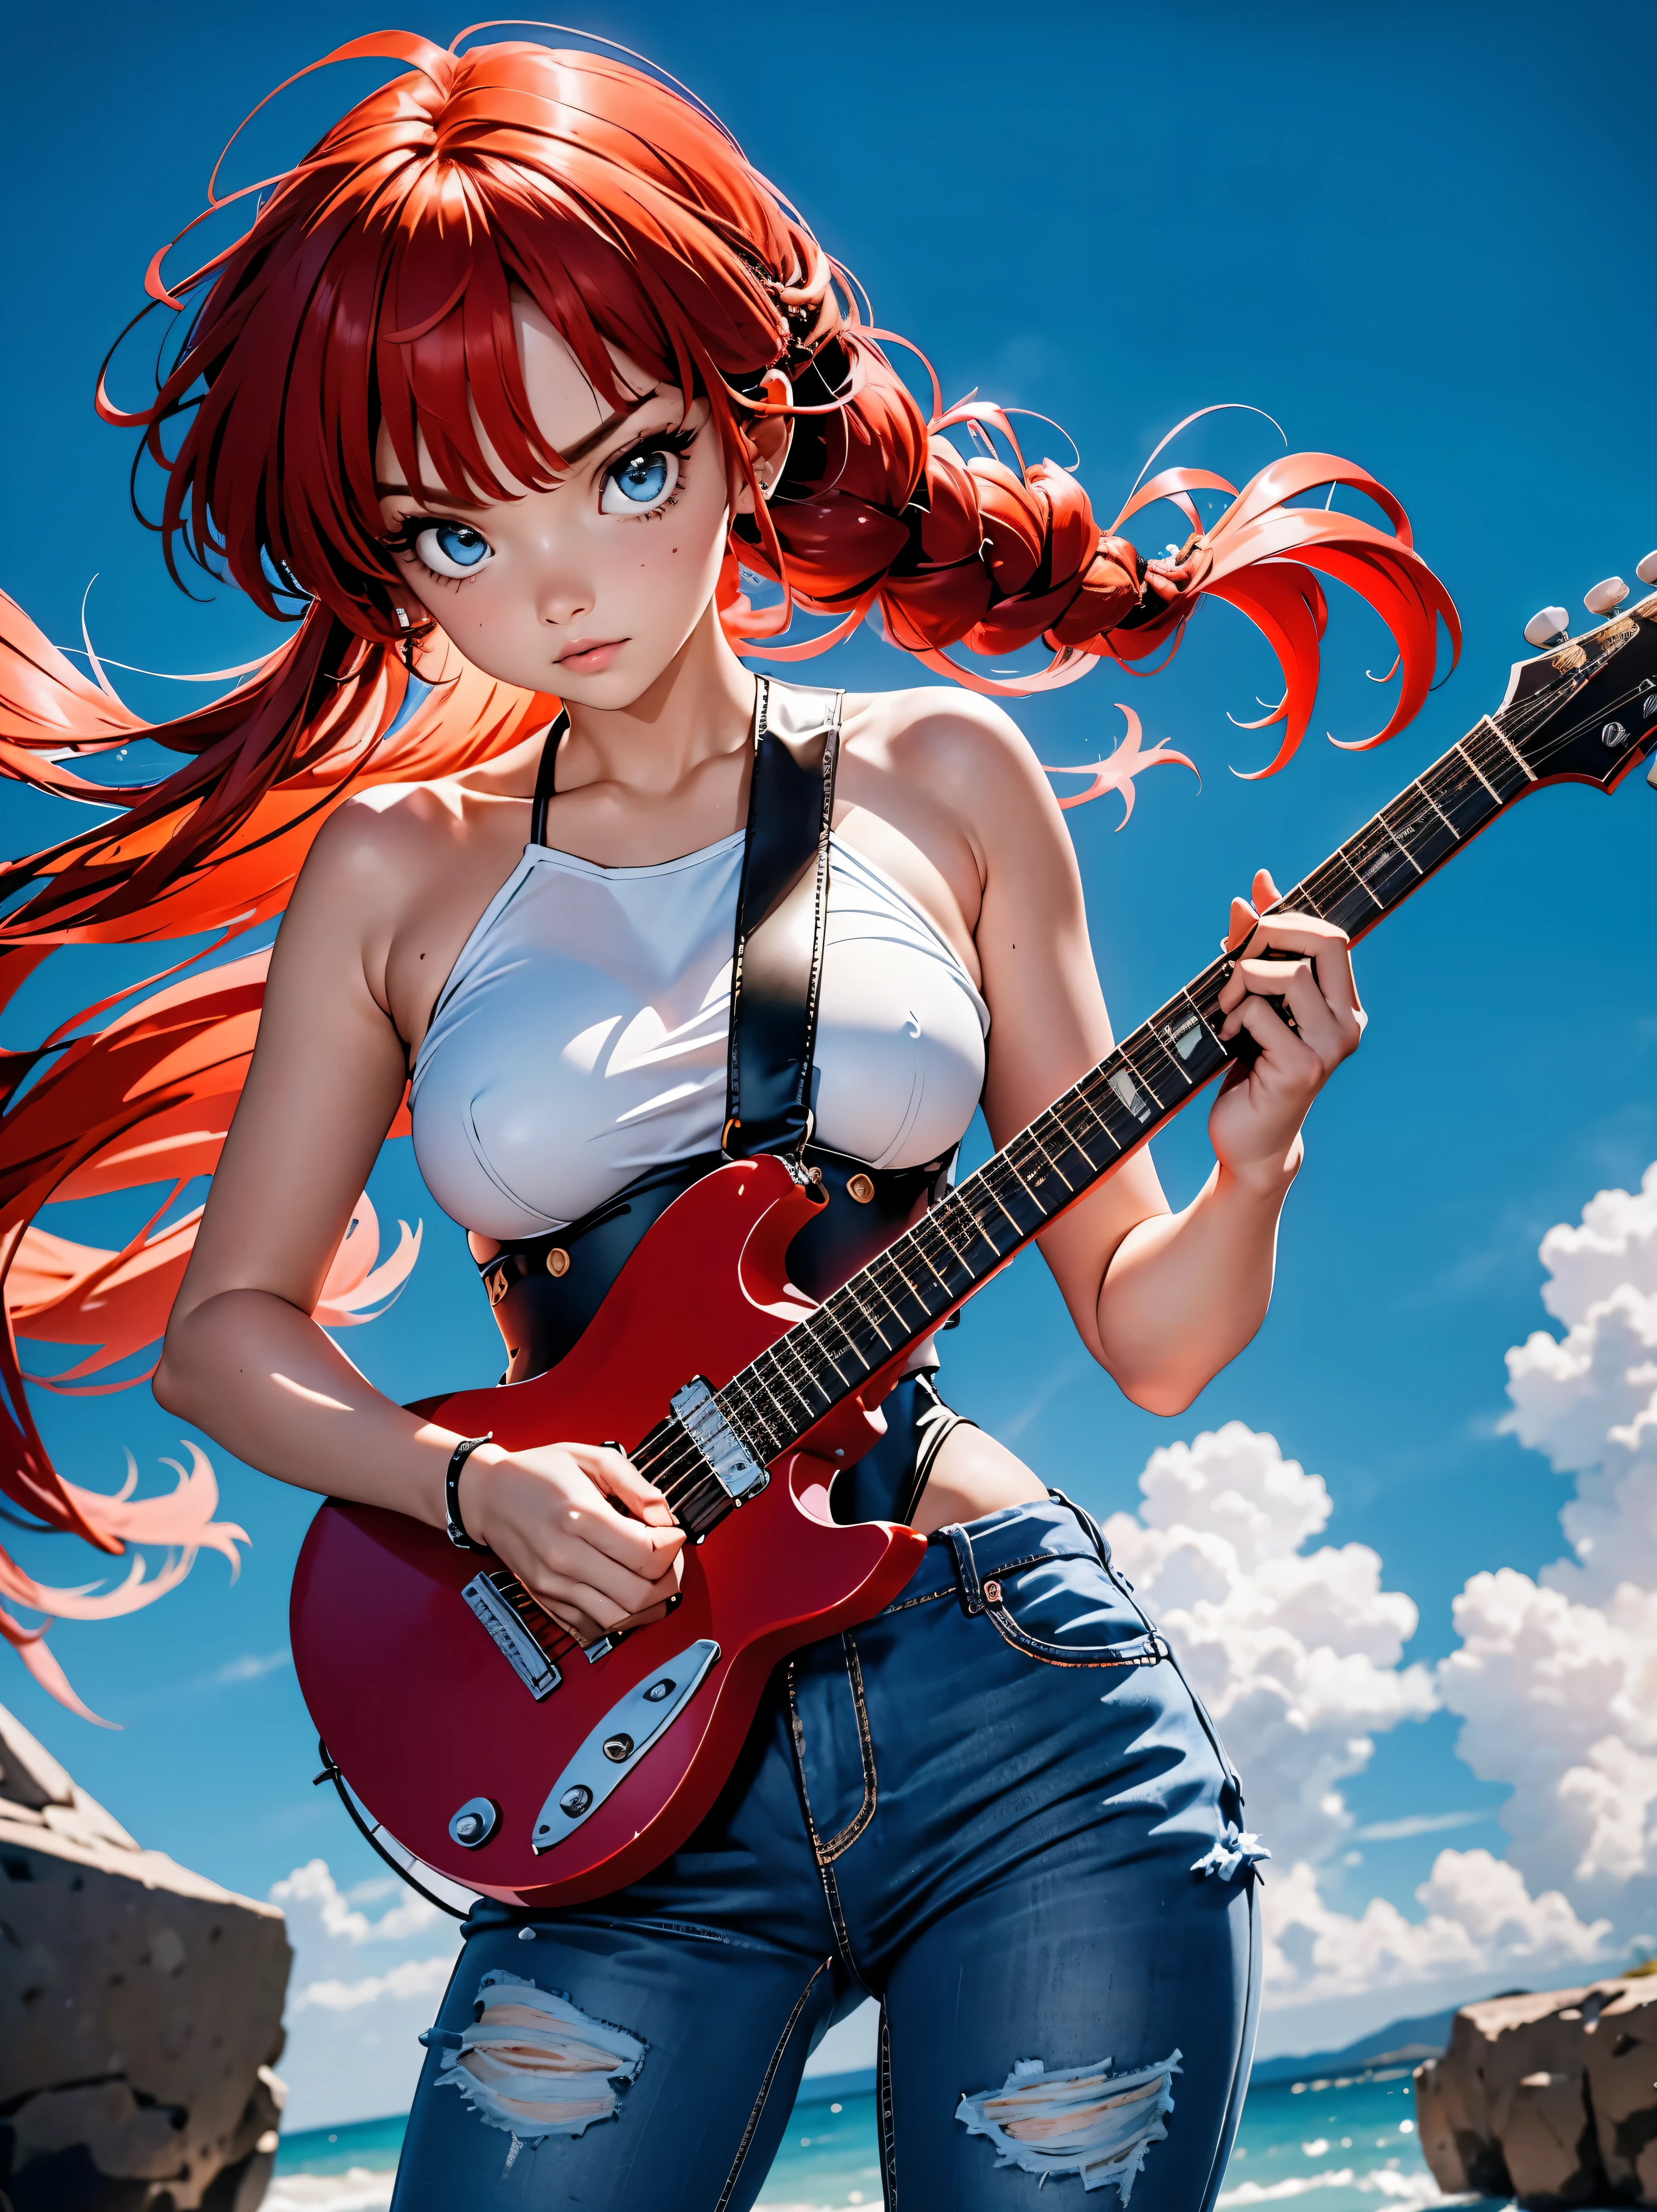 Redhead guitarist anime girl, guitarist girl em bermuda jeans e corset preto e black guitar, 15year old, Body cute, seios big fit asss, playing on guitar eletrica, heavy metal style, Iron Maiden band theme, sexy girl, red hair with braid, beautiful lighting, softshadows, blue colored eyes, pretty legs, hair with braid, anime styling, ranma chan, Autora Rumiko Takahashi, Based on a work by Rumiko Takahashi, Anime Ranma 1/ 2, decote sexy, robust hip, fully body, fully body, busto big fit ass, young girl with beautiful and beautiful body, sandals on his feet, garota 15year old jovem baixa estatura, wearing denim shorts and corset, anime girl, anime styling, beautiful feet in sandals, 45° viewing angle, plein-air, red hair braid, big fit ass , peito big fit ass, hair braid, guitarist girl, Heavy metal music, braided hair blown by strong wind, guitar in hands, playing on guitar, strong wind, black guitar